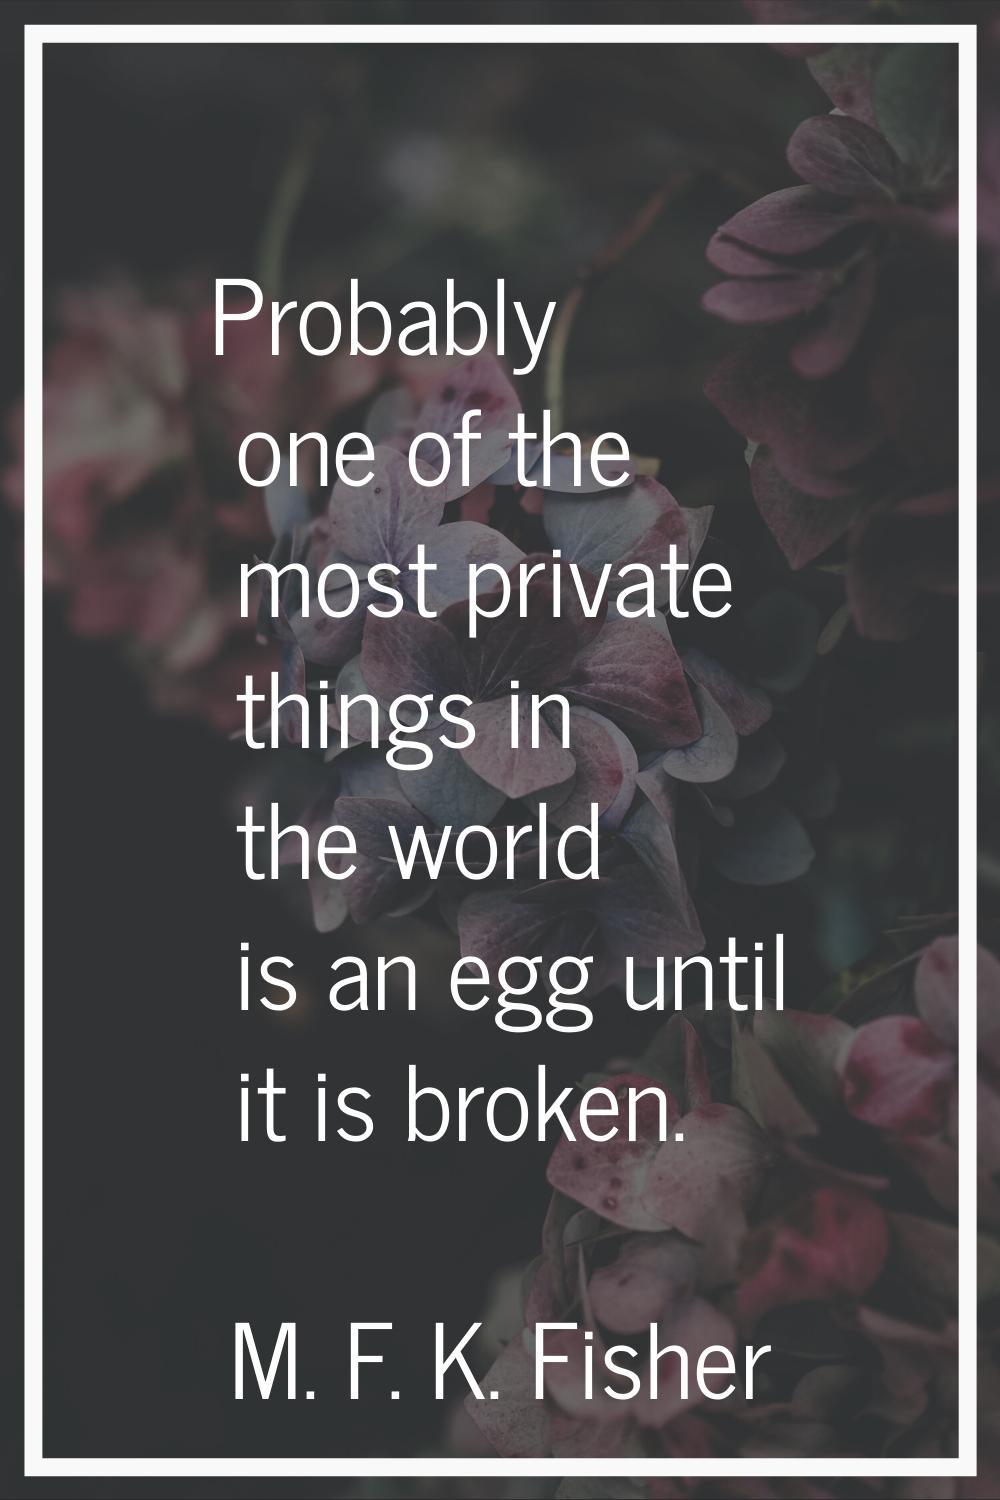 Probably one of the most private things in the world is an egg until it is broken.